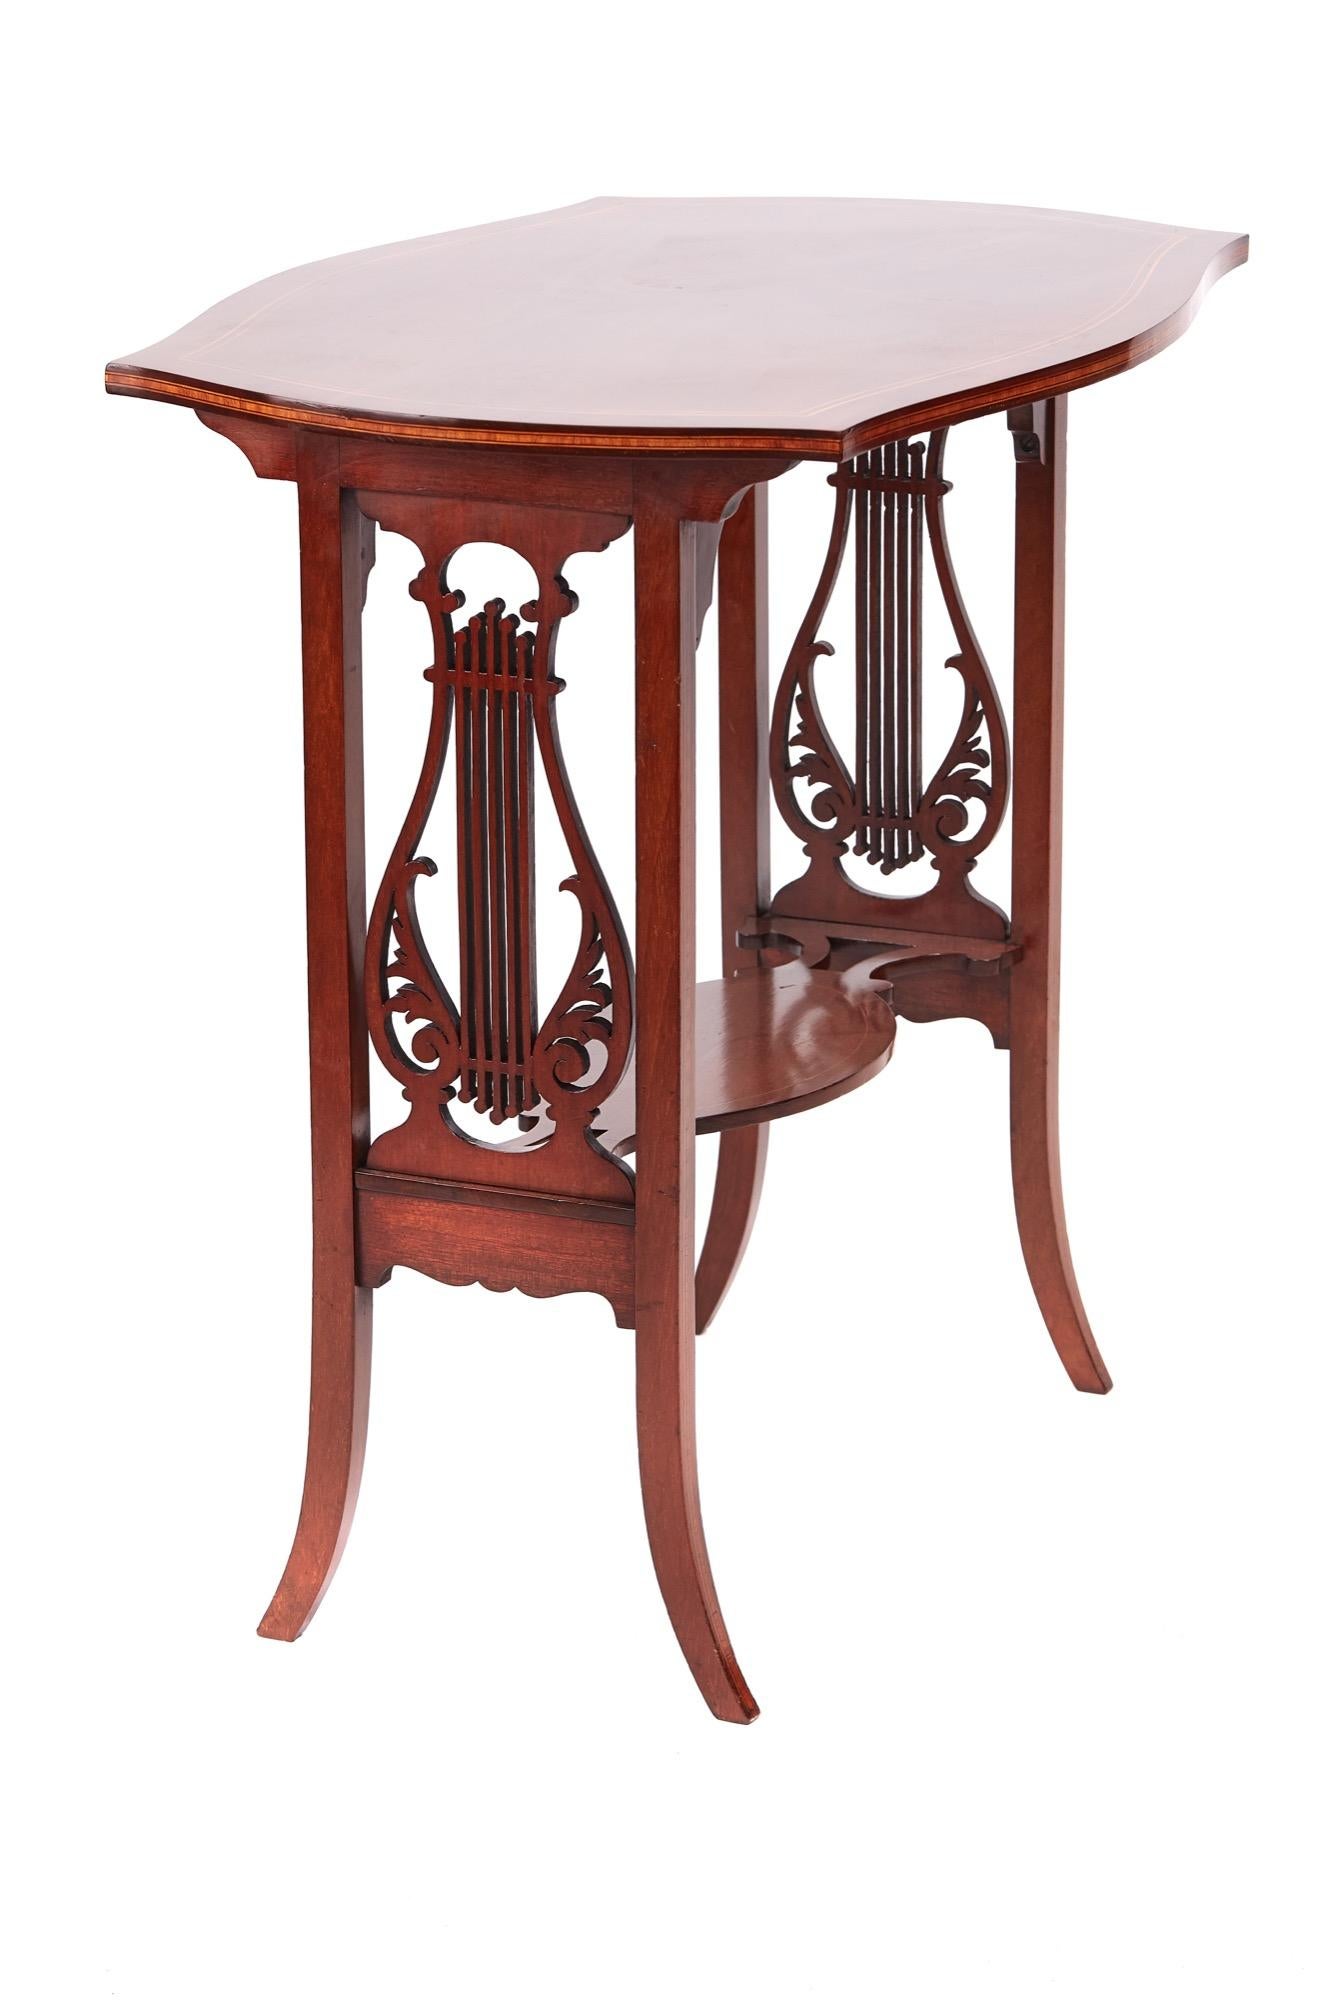 Quality Edwardian mahogany inlaid lamp table having an outstanding quality shaped mahogany top with satinwood inlay supported by a delightful pierced lyre shaped end. It is standing on four mahogany inlaid shaped legs and united by a shaped